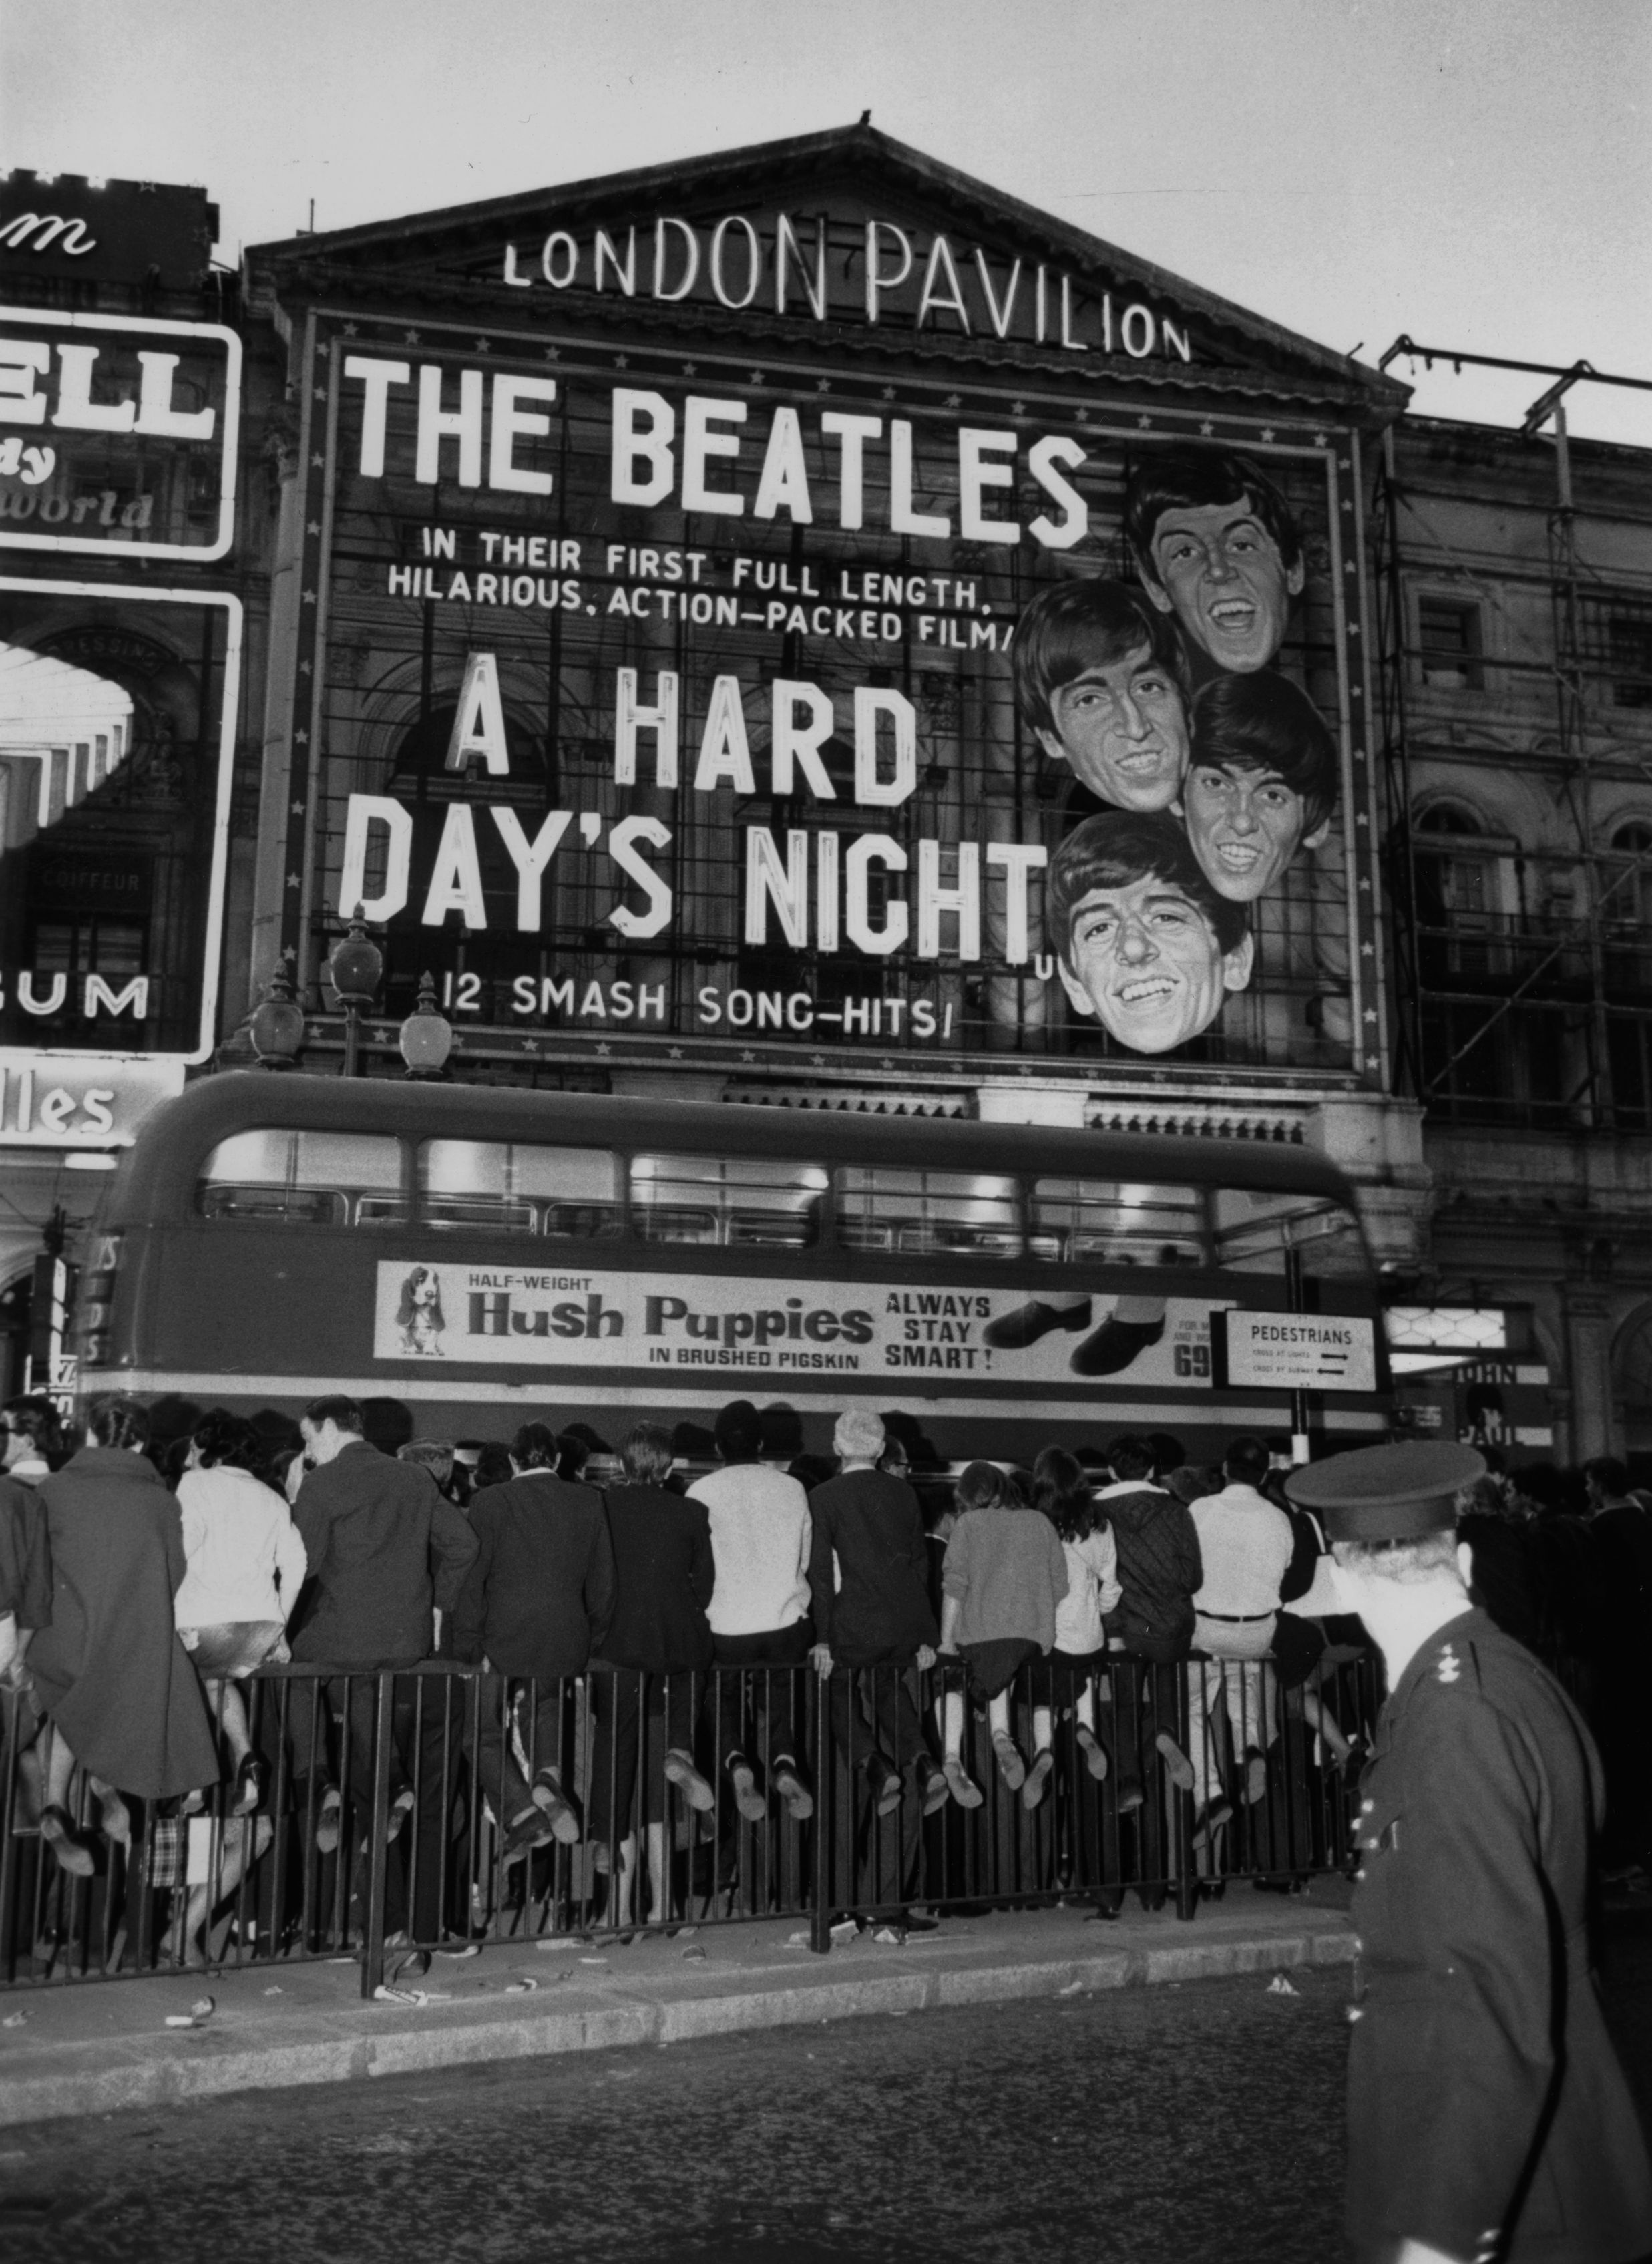 1964: Fans crowding the street outside the London Pavilion before a screening of the Beatles' first feature-length film, 'A Hard Day's Night'. (Photo by Keystone/Getty Images)